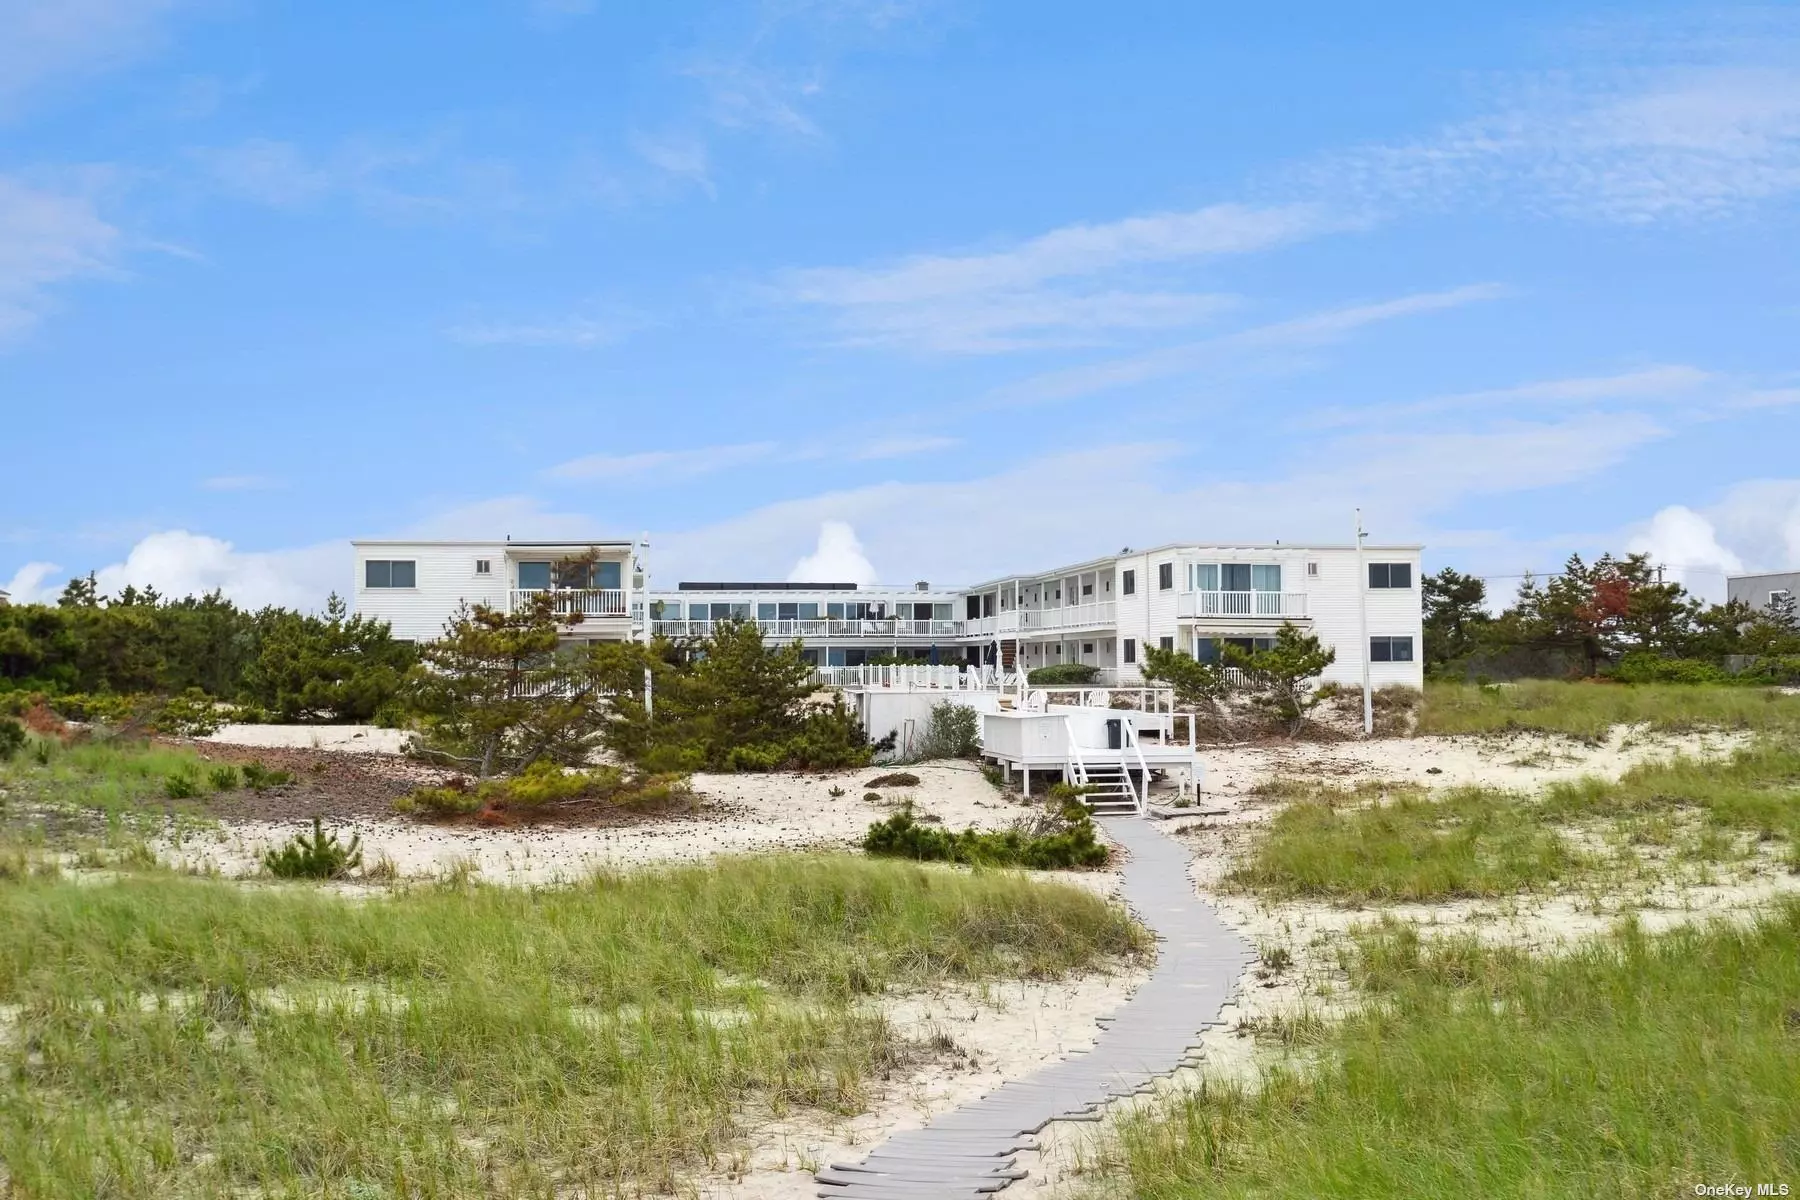 Oceanfront effortless beach living at the sought after La Coquille complex, located directly on the white sandy beaches of Dune Road and a just short stroll to Main Street for village shops and restaurants. This studio/1 bath unit with open kitchen and living spaces is a perfect summer retreat for no fuss easy days on the beach. It is a sunny 1st floor unit with a wall of windows and sliders to access a private balcony or walk right out to the heated pool and ocean. The doorman attended building with concierge services is smoke and pet free, and offers separate owner&rsquo;s lockers and bike storage, laundry in the building, as well as owner reserved and guest parking.